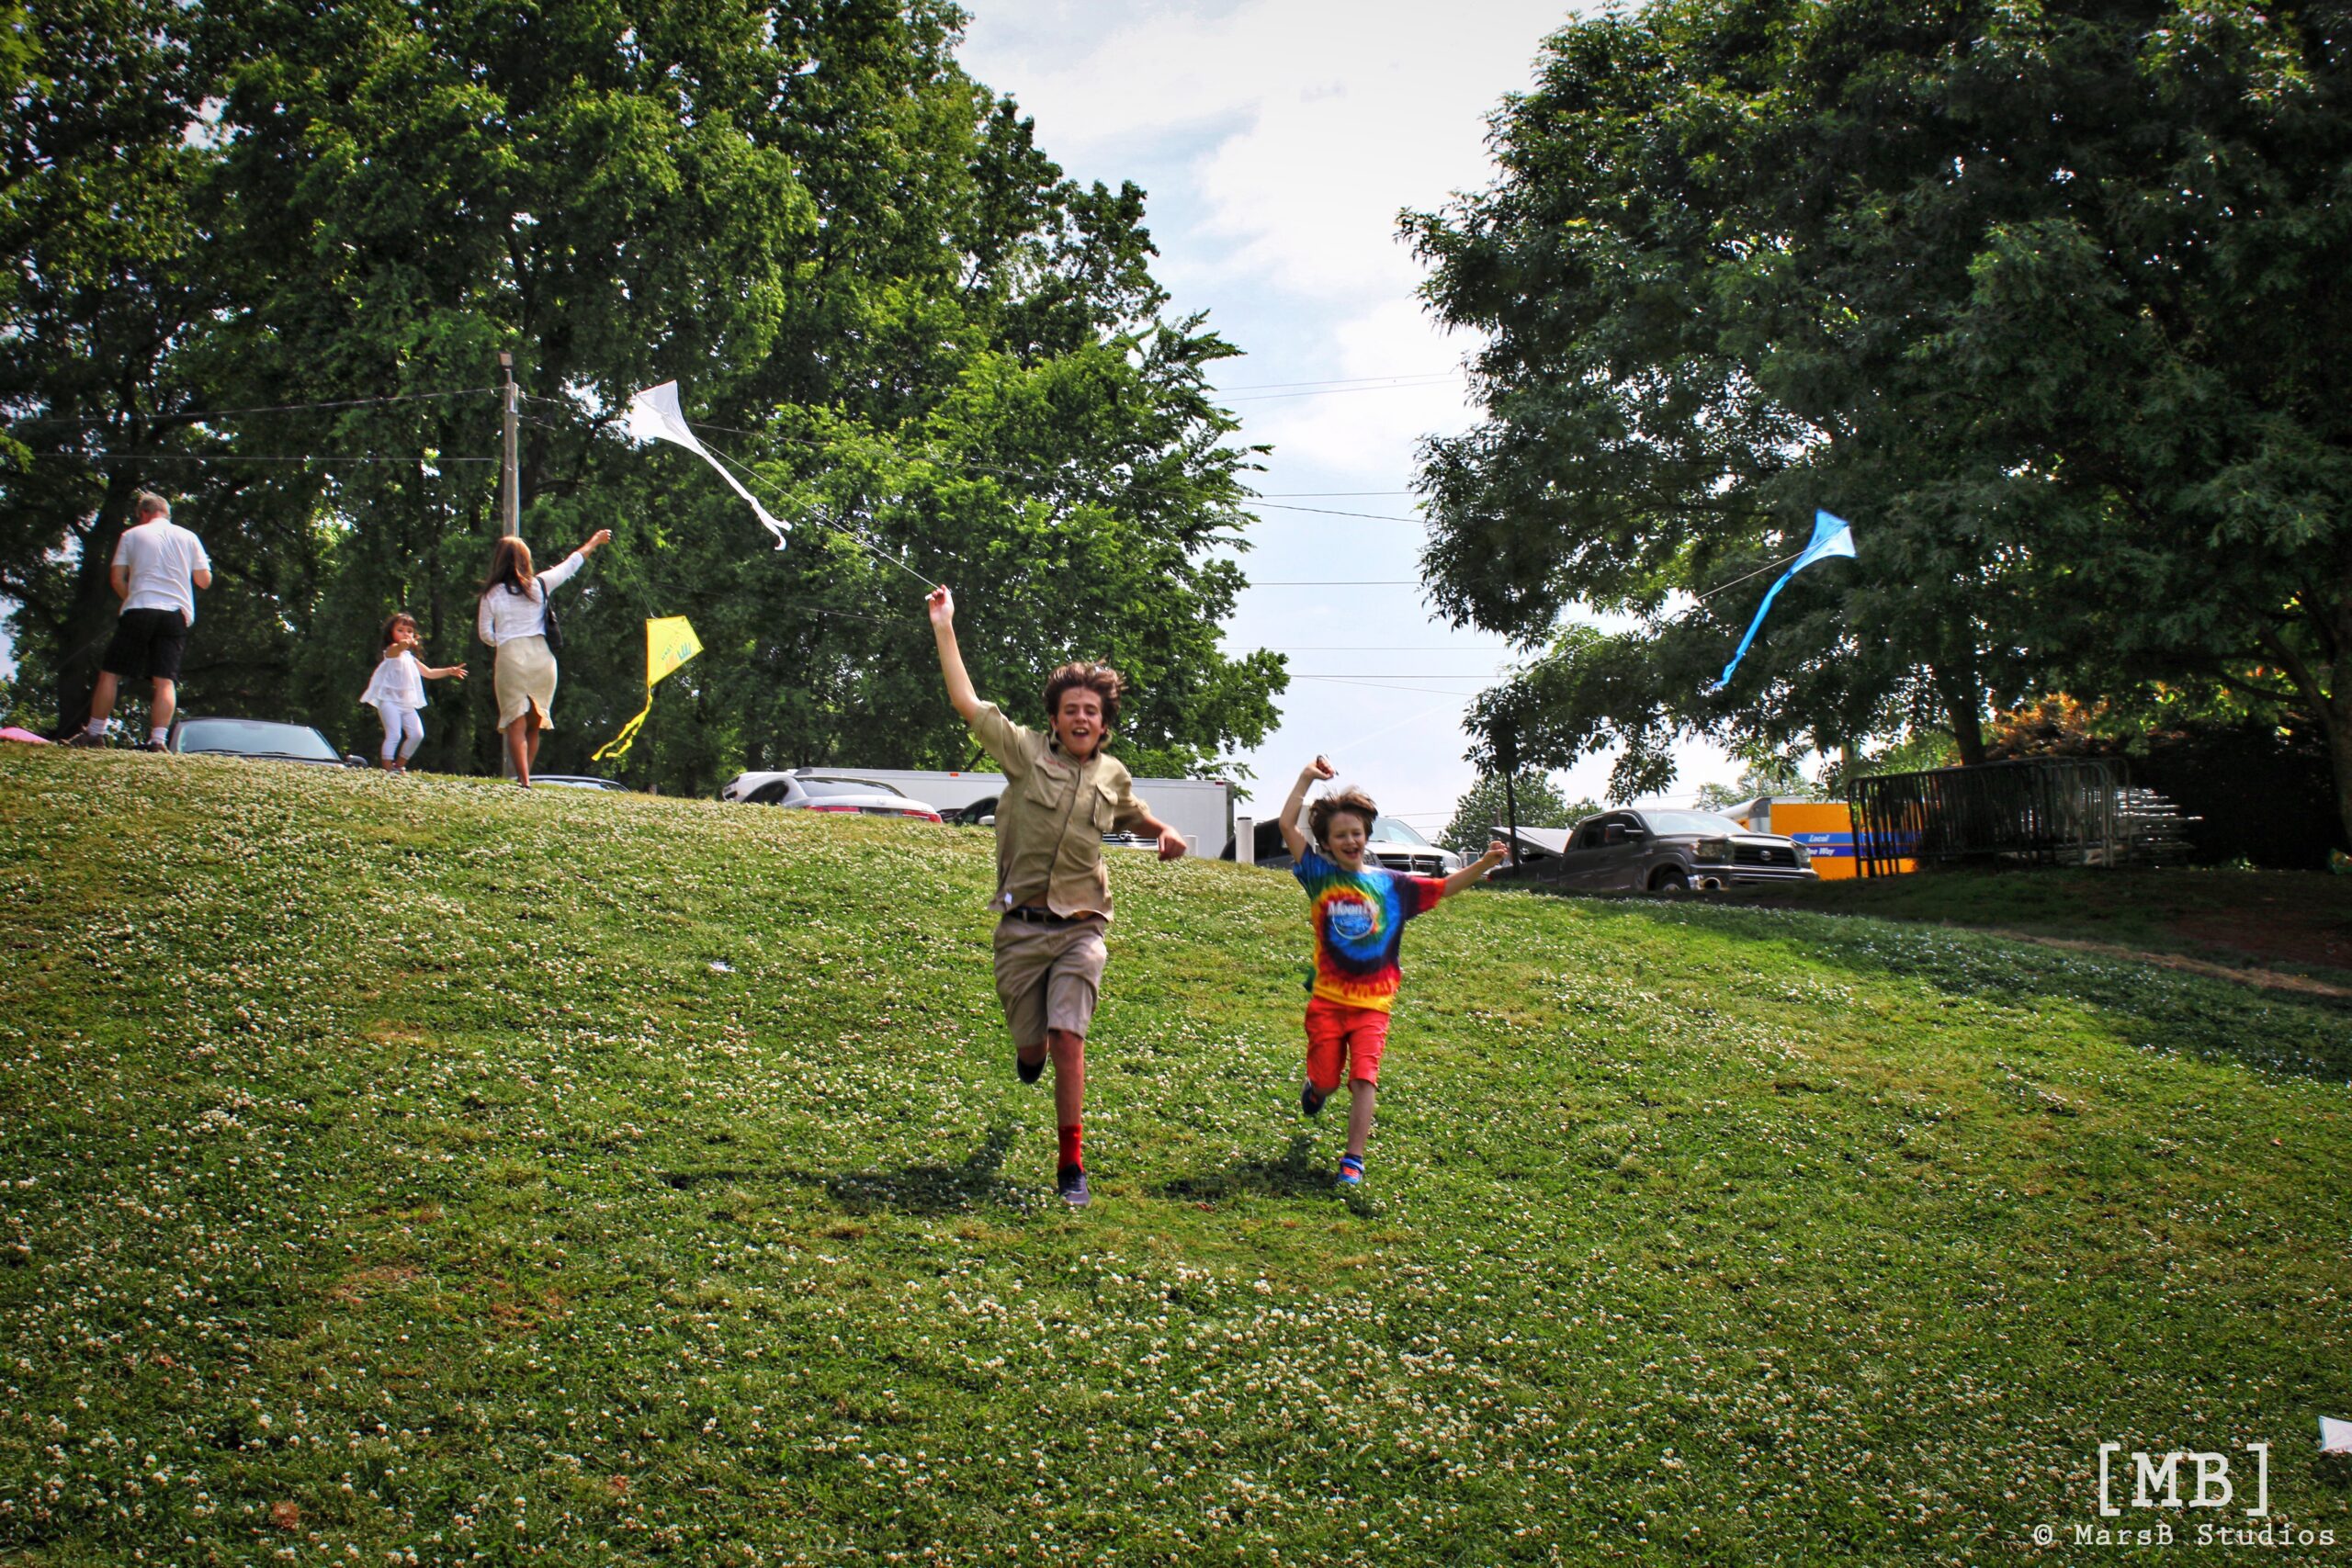 News: Inaugural “Let’s Go Fly a Kite” Successfully Launches